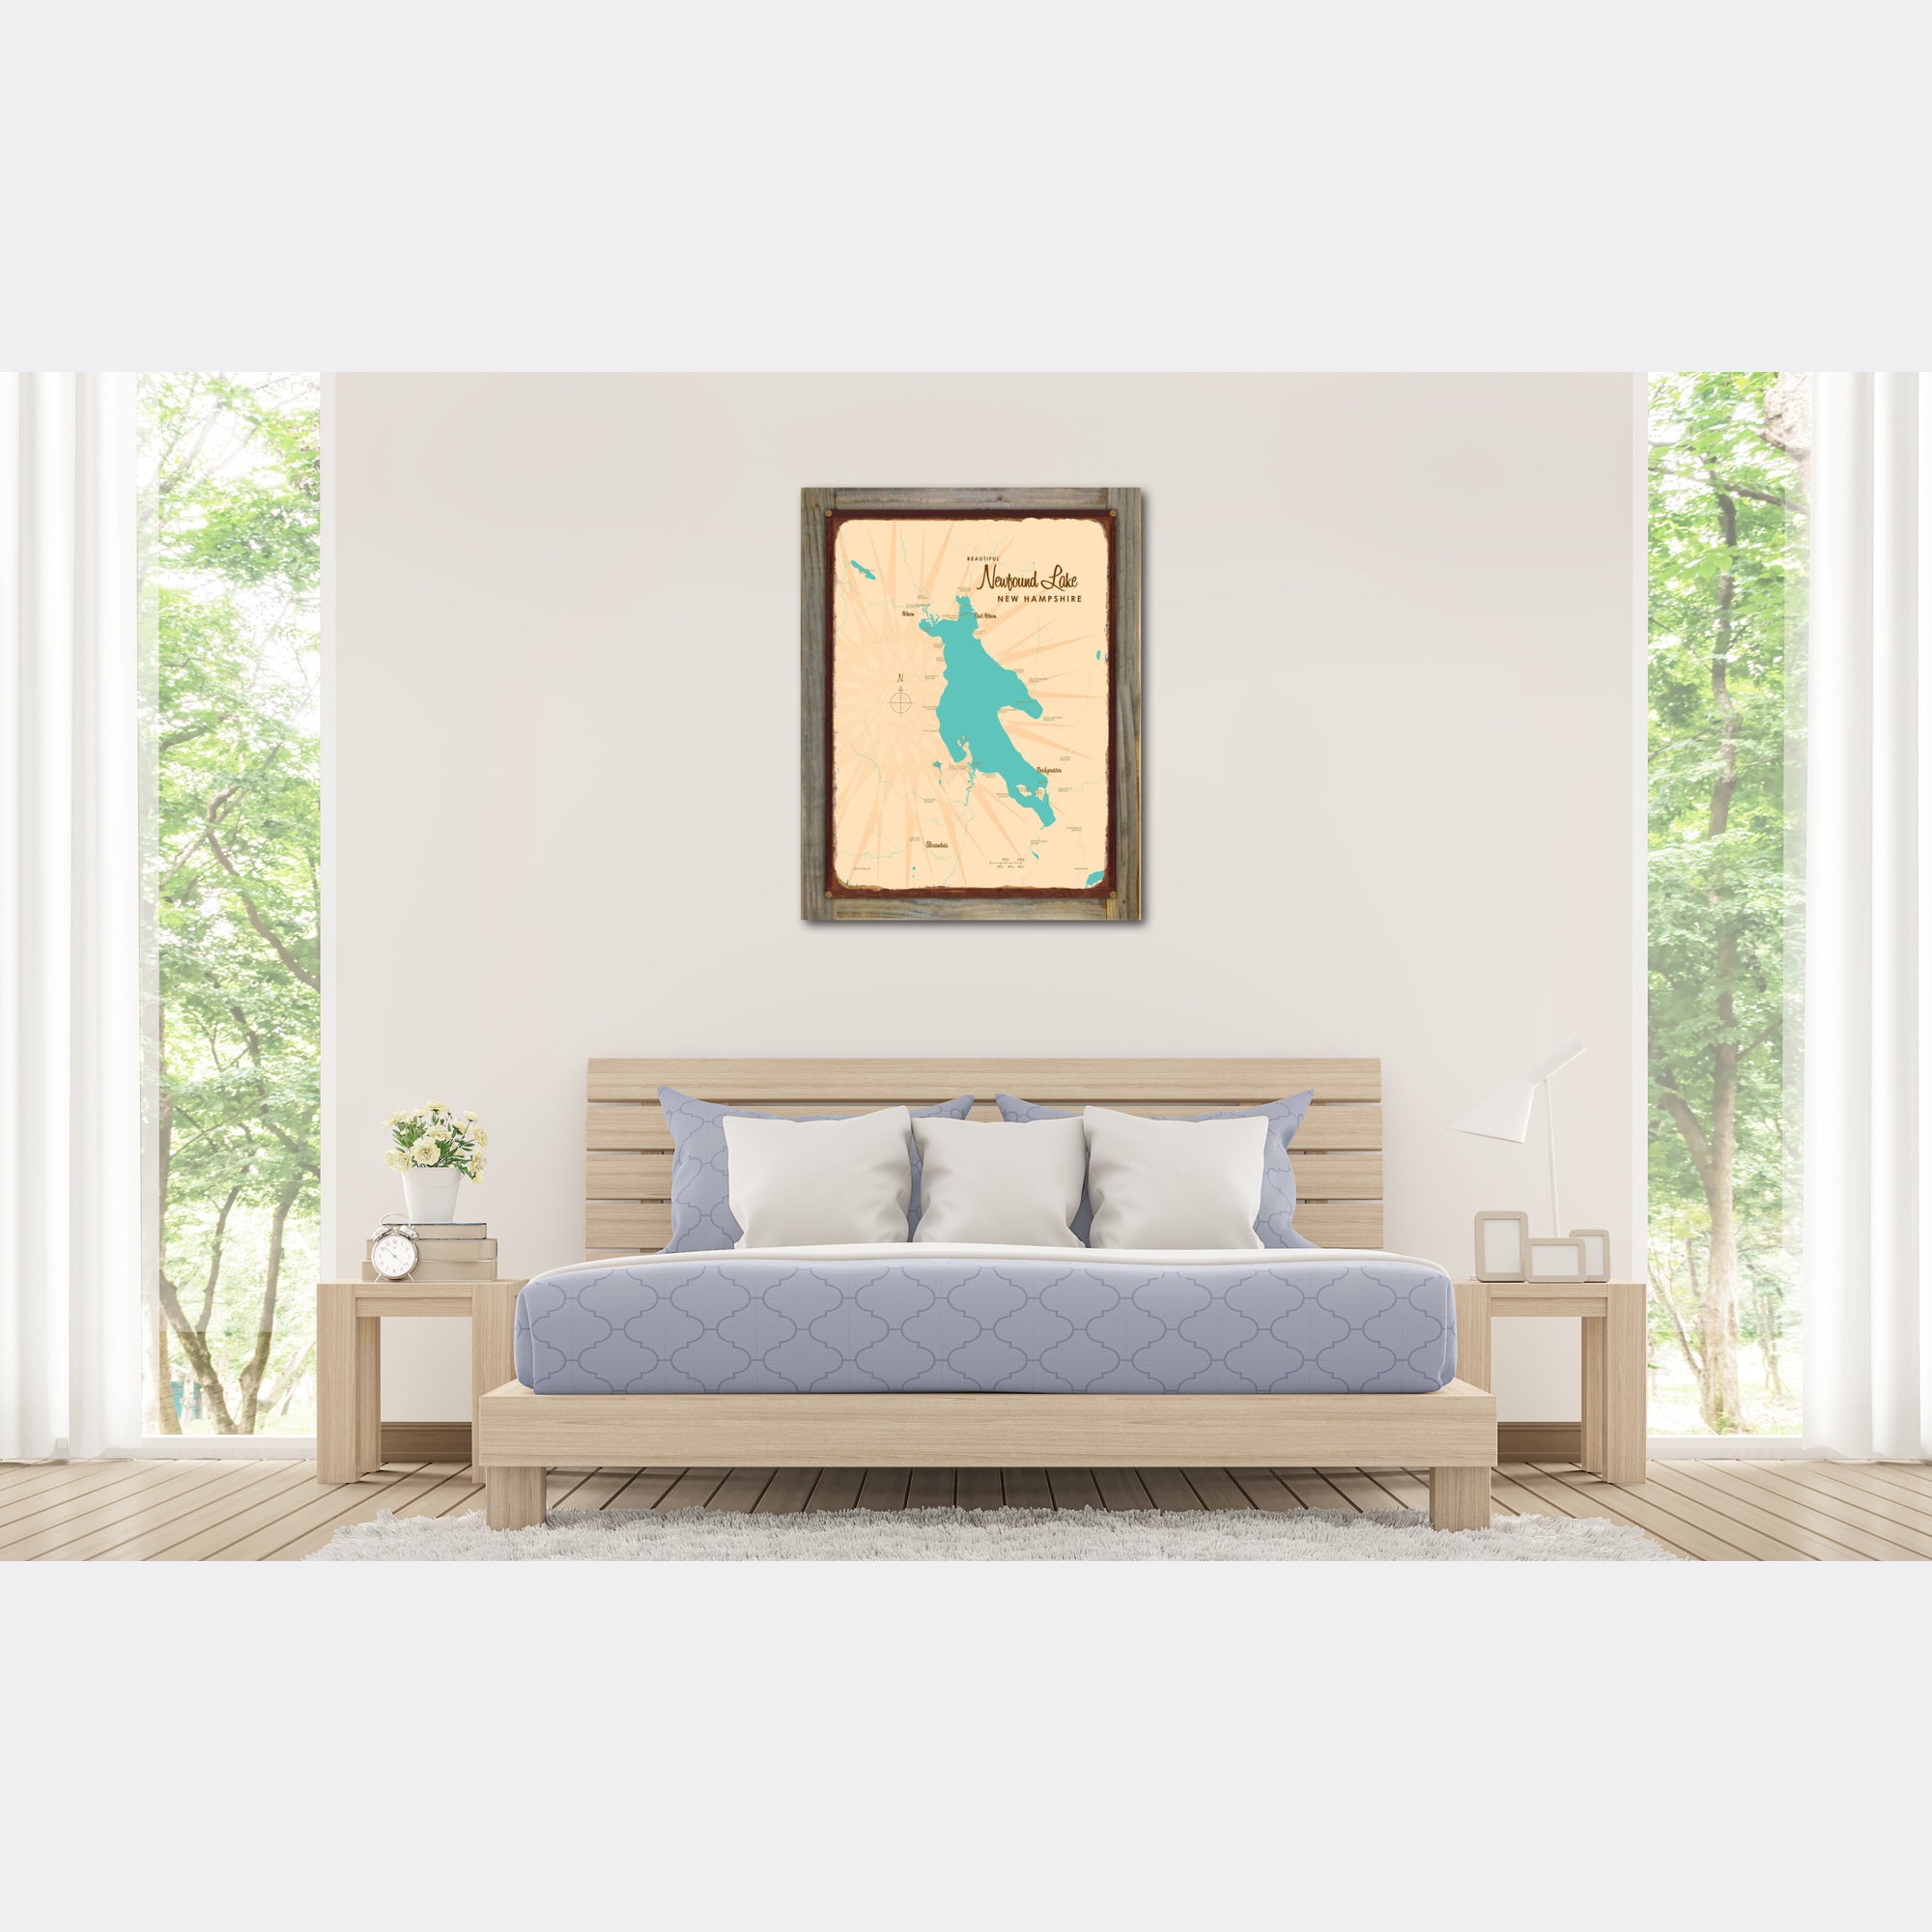 Newfound Lake New Hampshire, Wood-Mounted Rustic Metal Sign Map Art